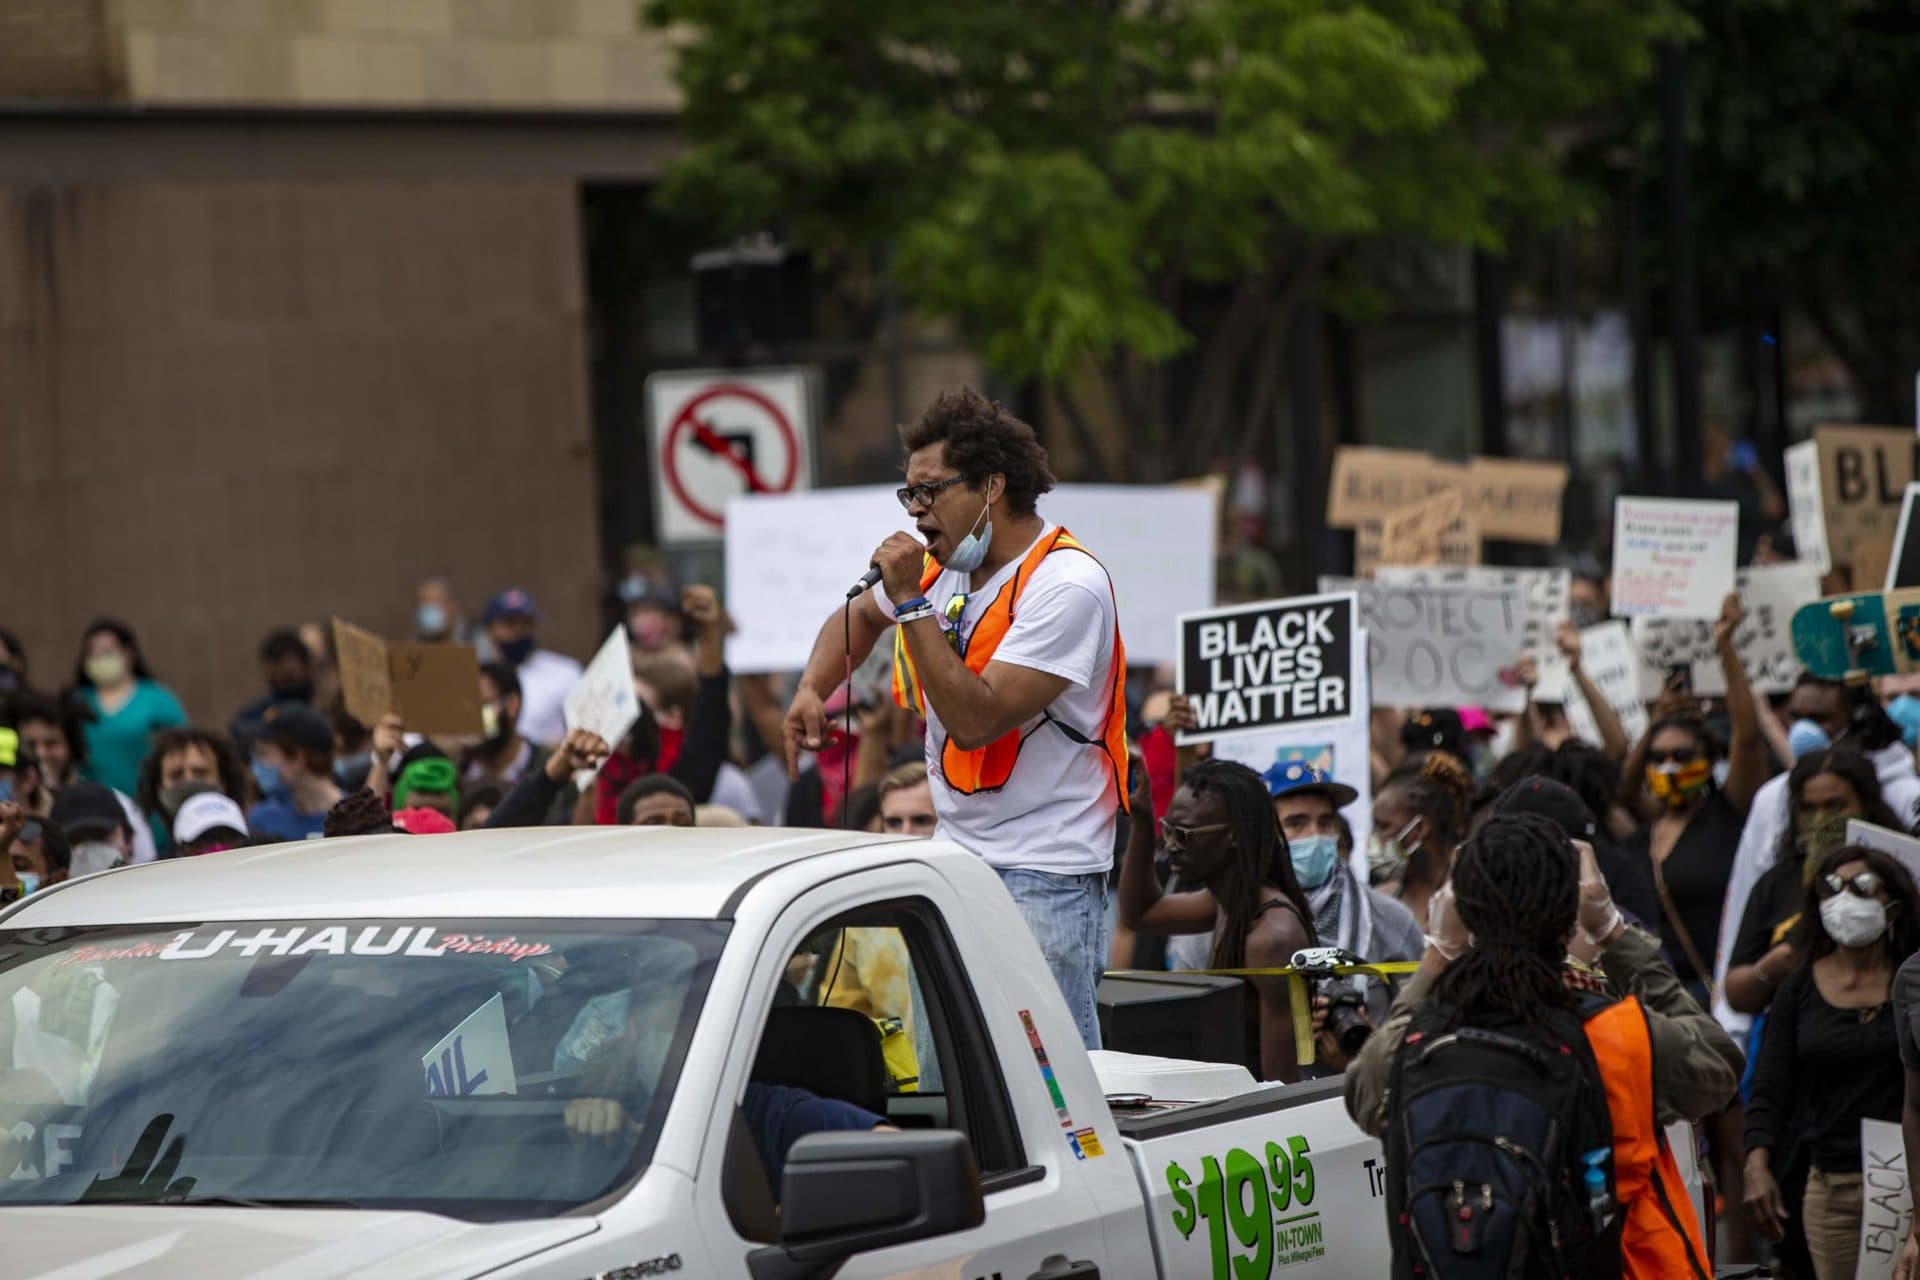 Standing in the back of a rental pickup, Brock Satter leads about 1,000 protesters down Washington Street in Boston in outrage over the killing of George Floyd, joining other protests nationwide. (Jesse Costa/WBUR)